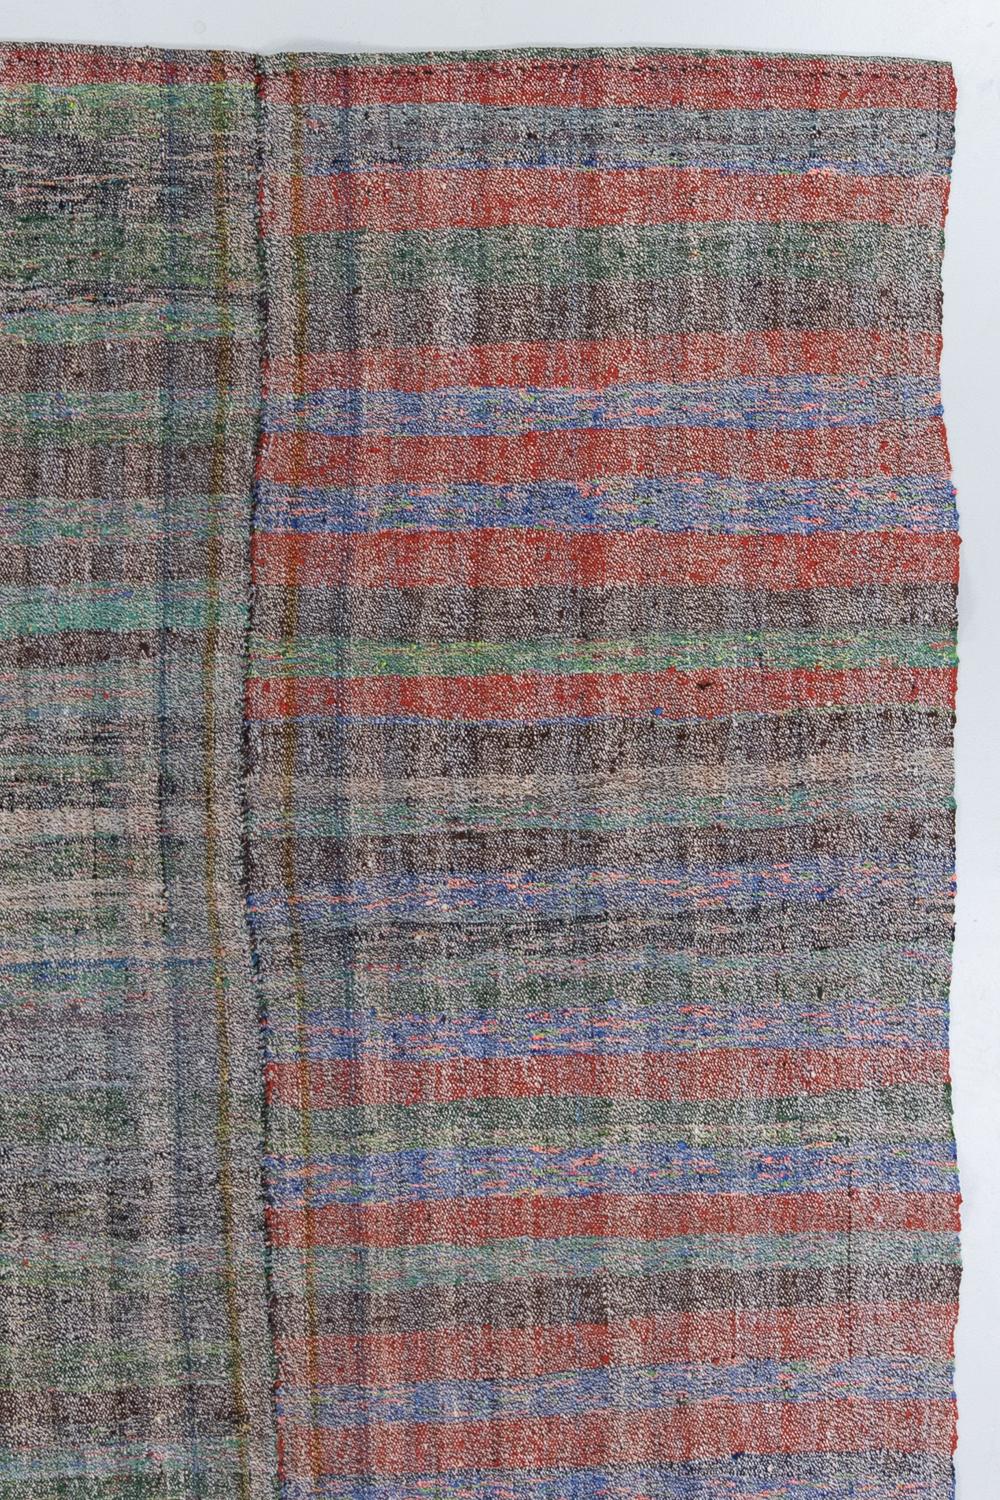  Vintage Plaid Turkish Kilim Rug In Good Condition For Sale In West Palm Beach, FL